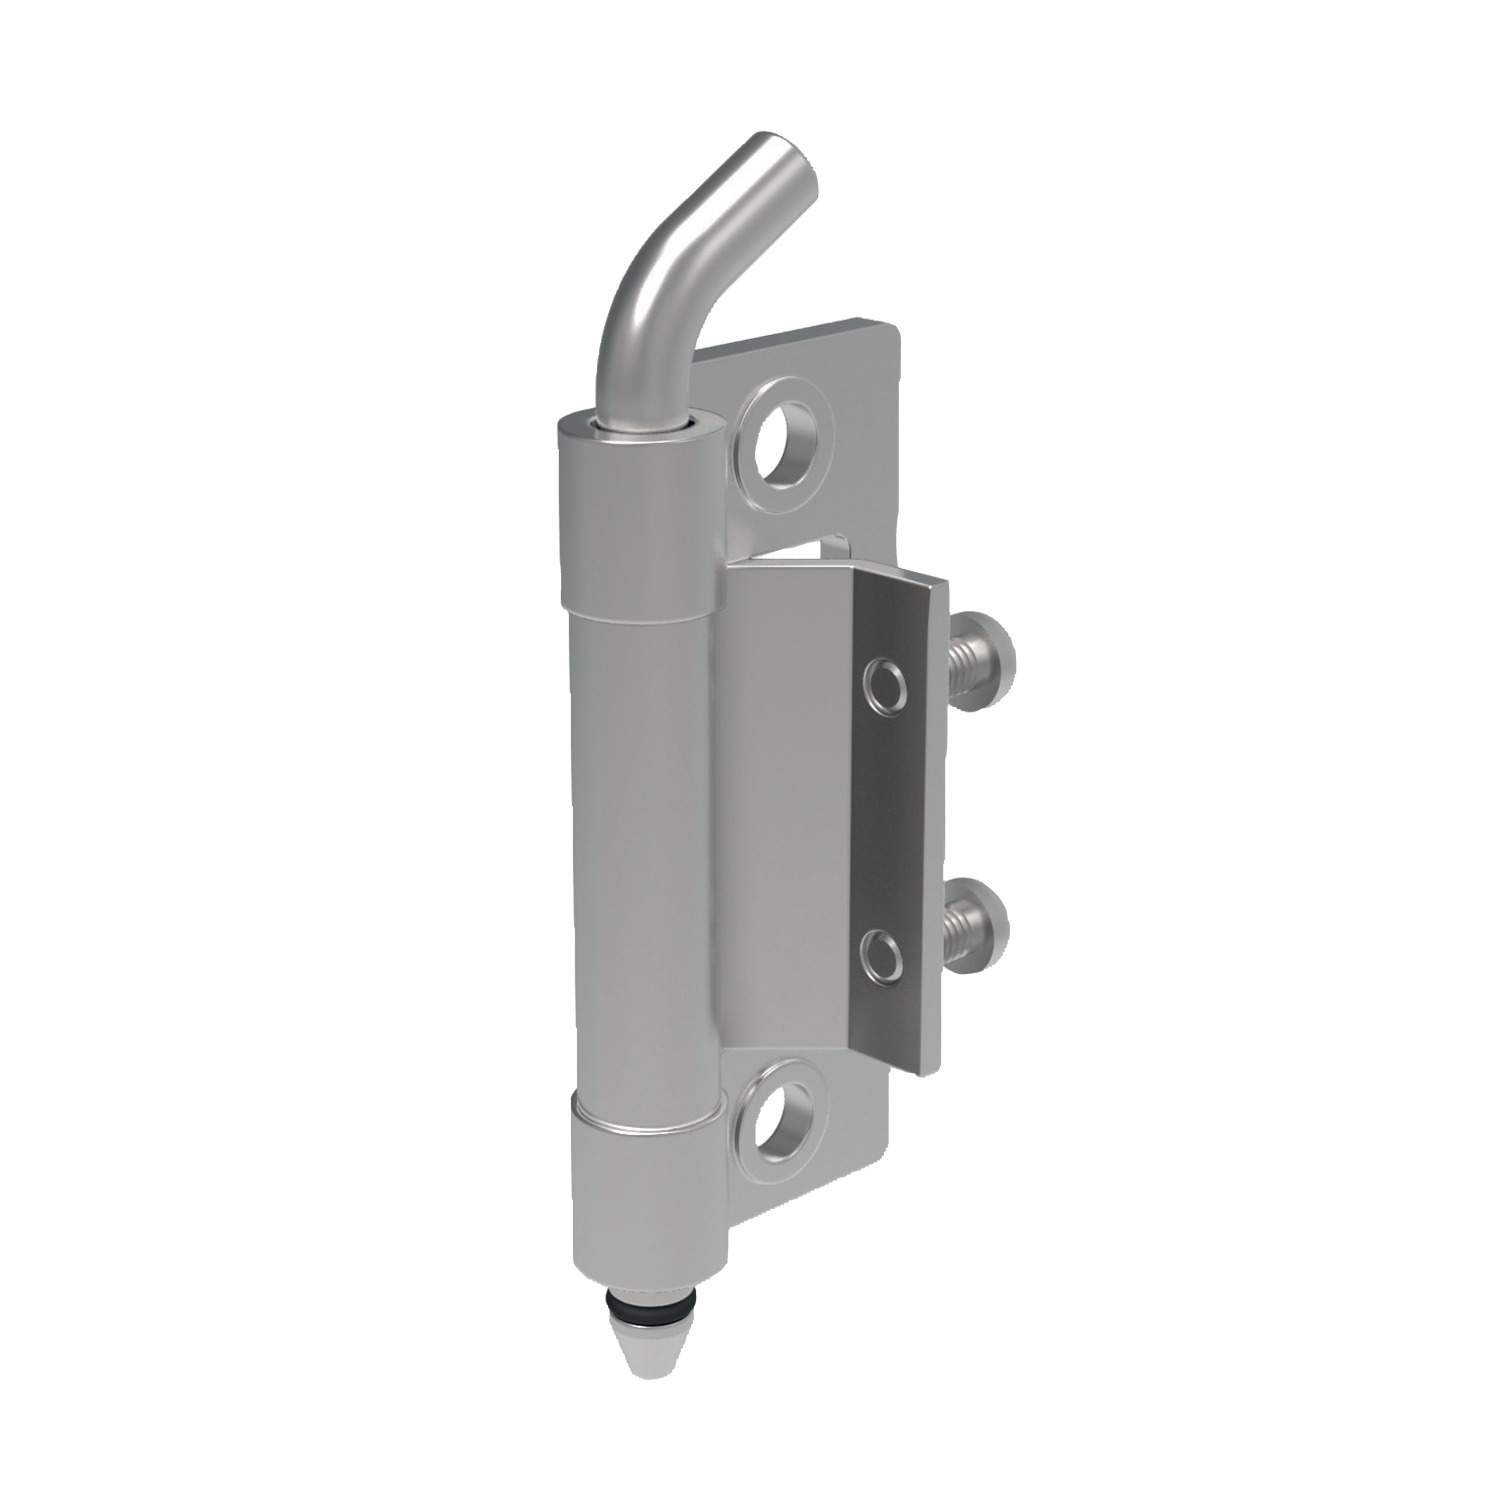 S2104 - Concealed Pivot Hinges - Lift Off